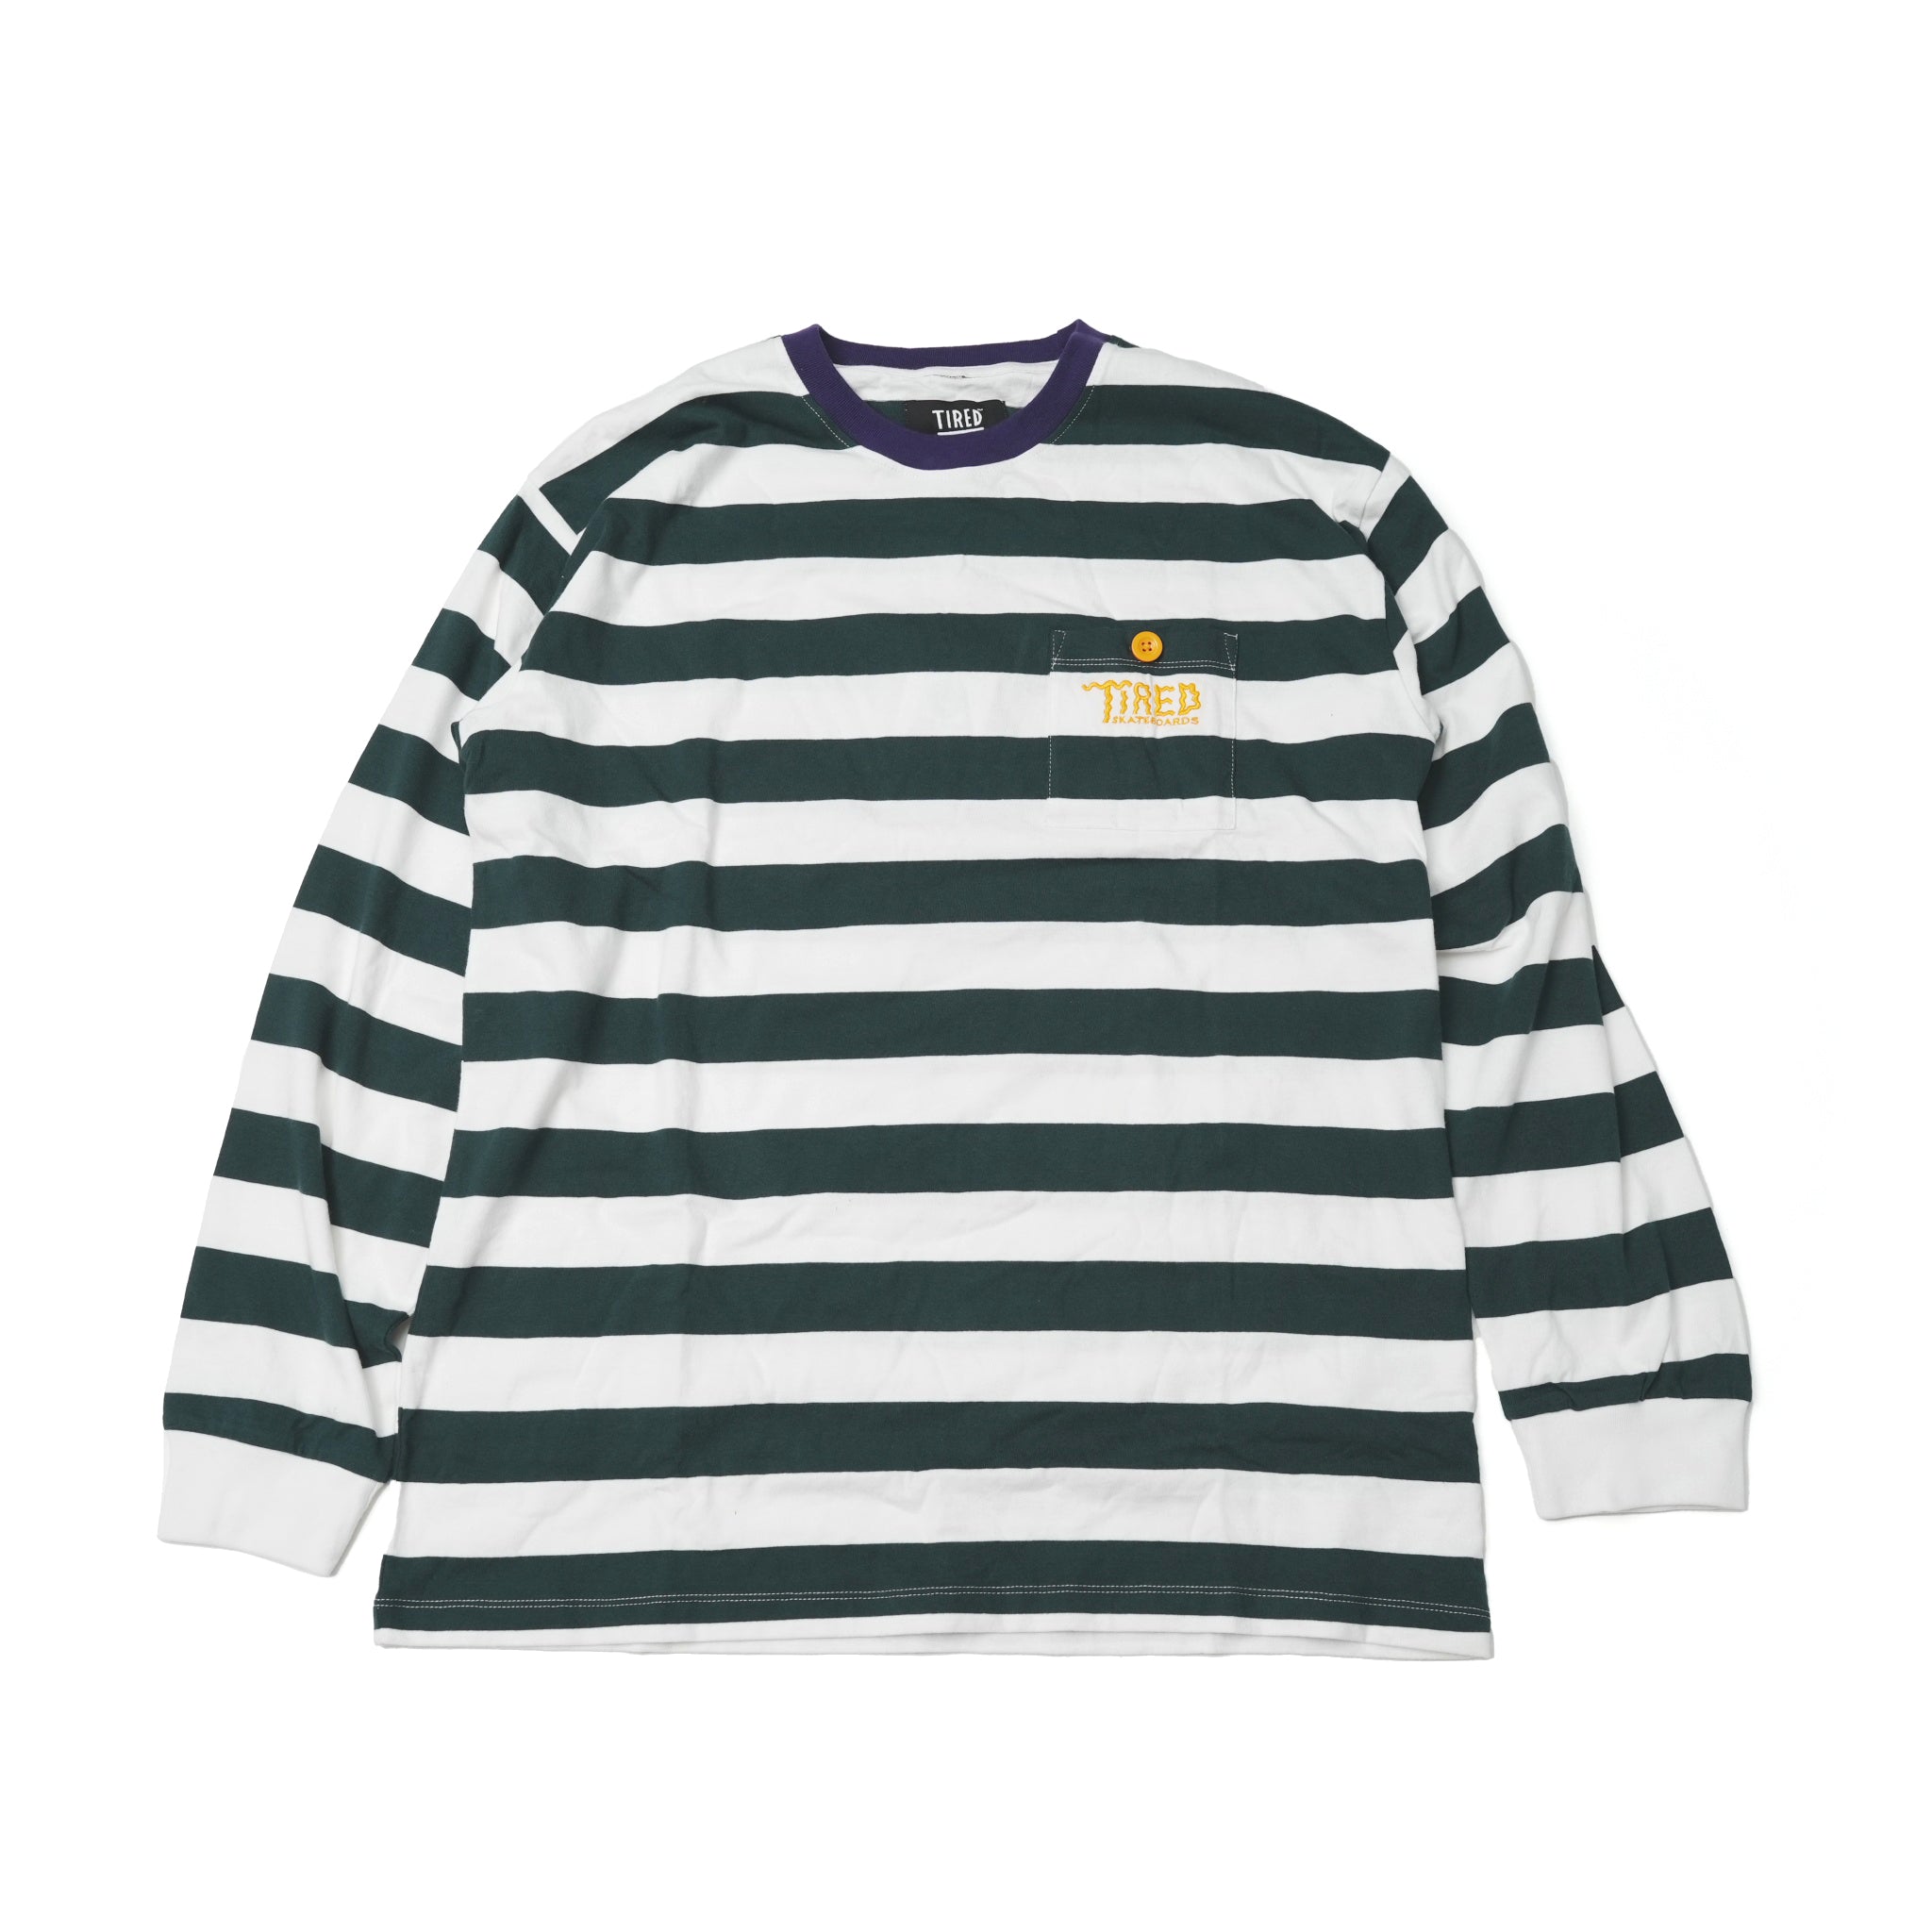 No:TS00314 | Name:SQUIGGLY LOGO STRIPED POCKET LS | Color:Purple/Forest【TIRED_タイレッド】